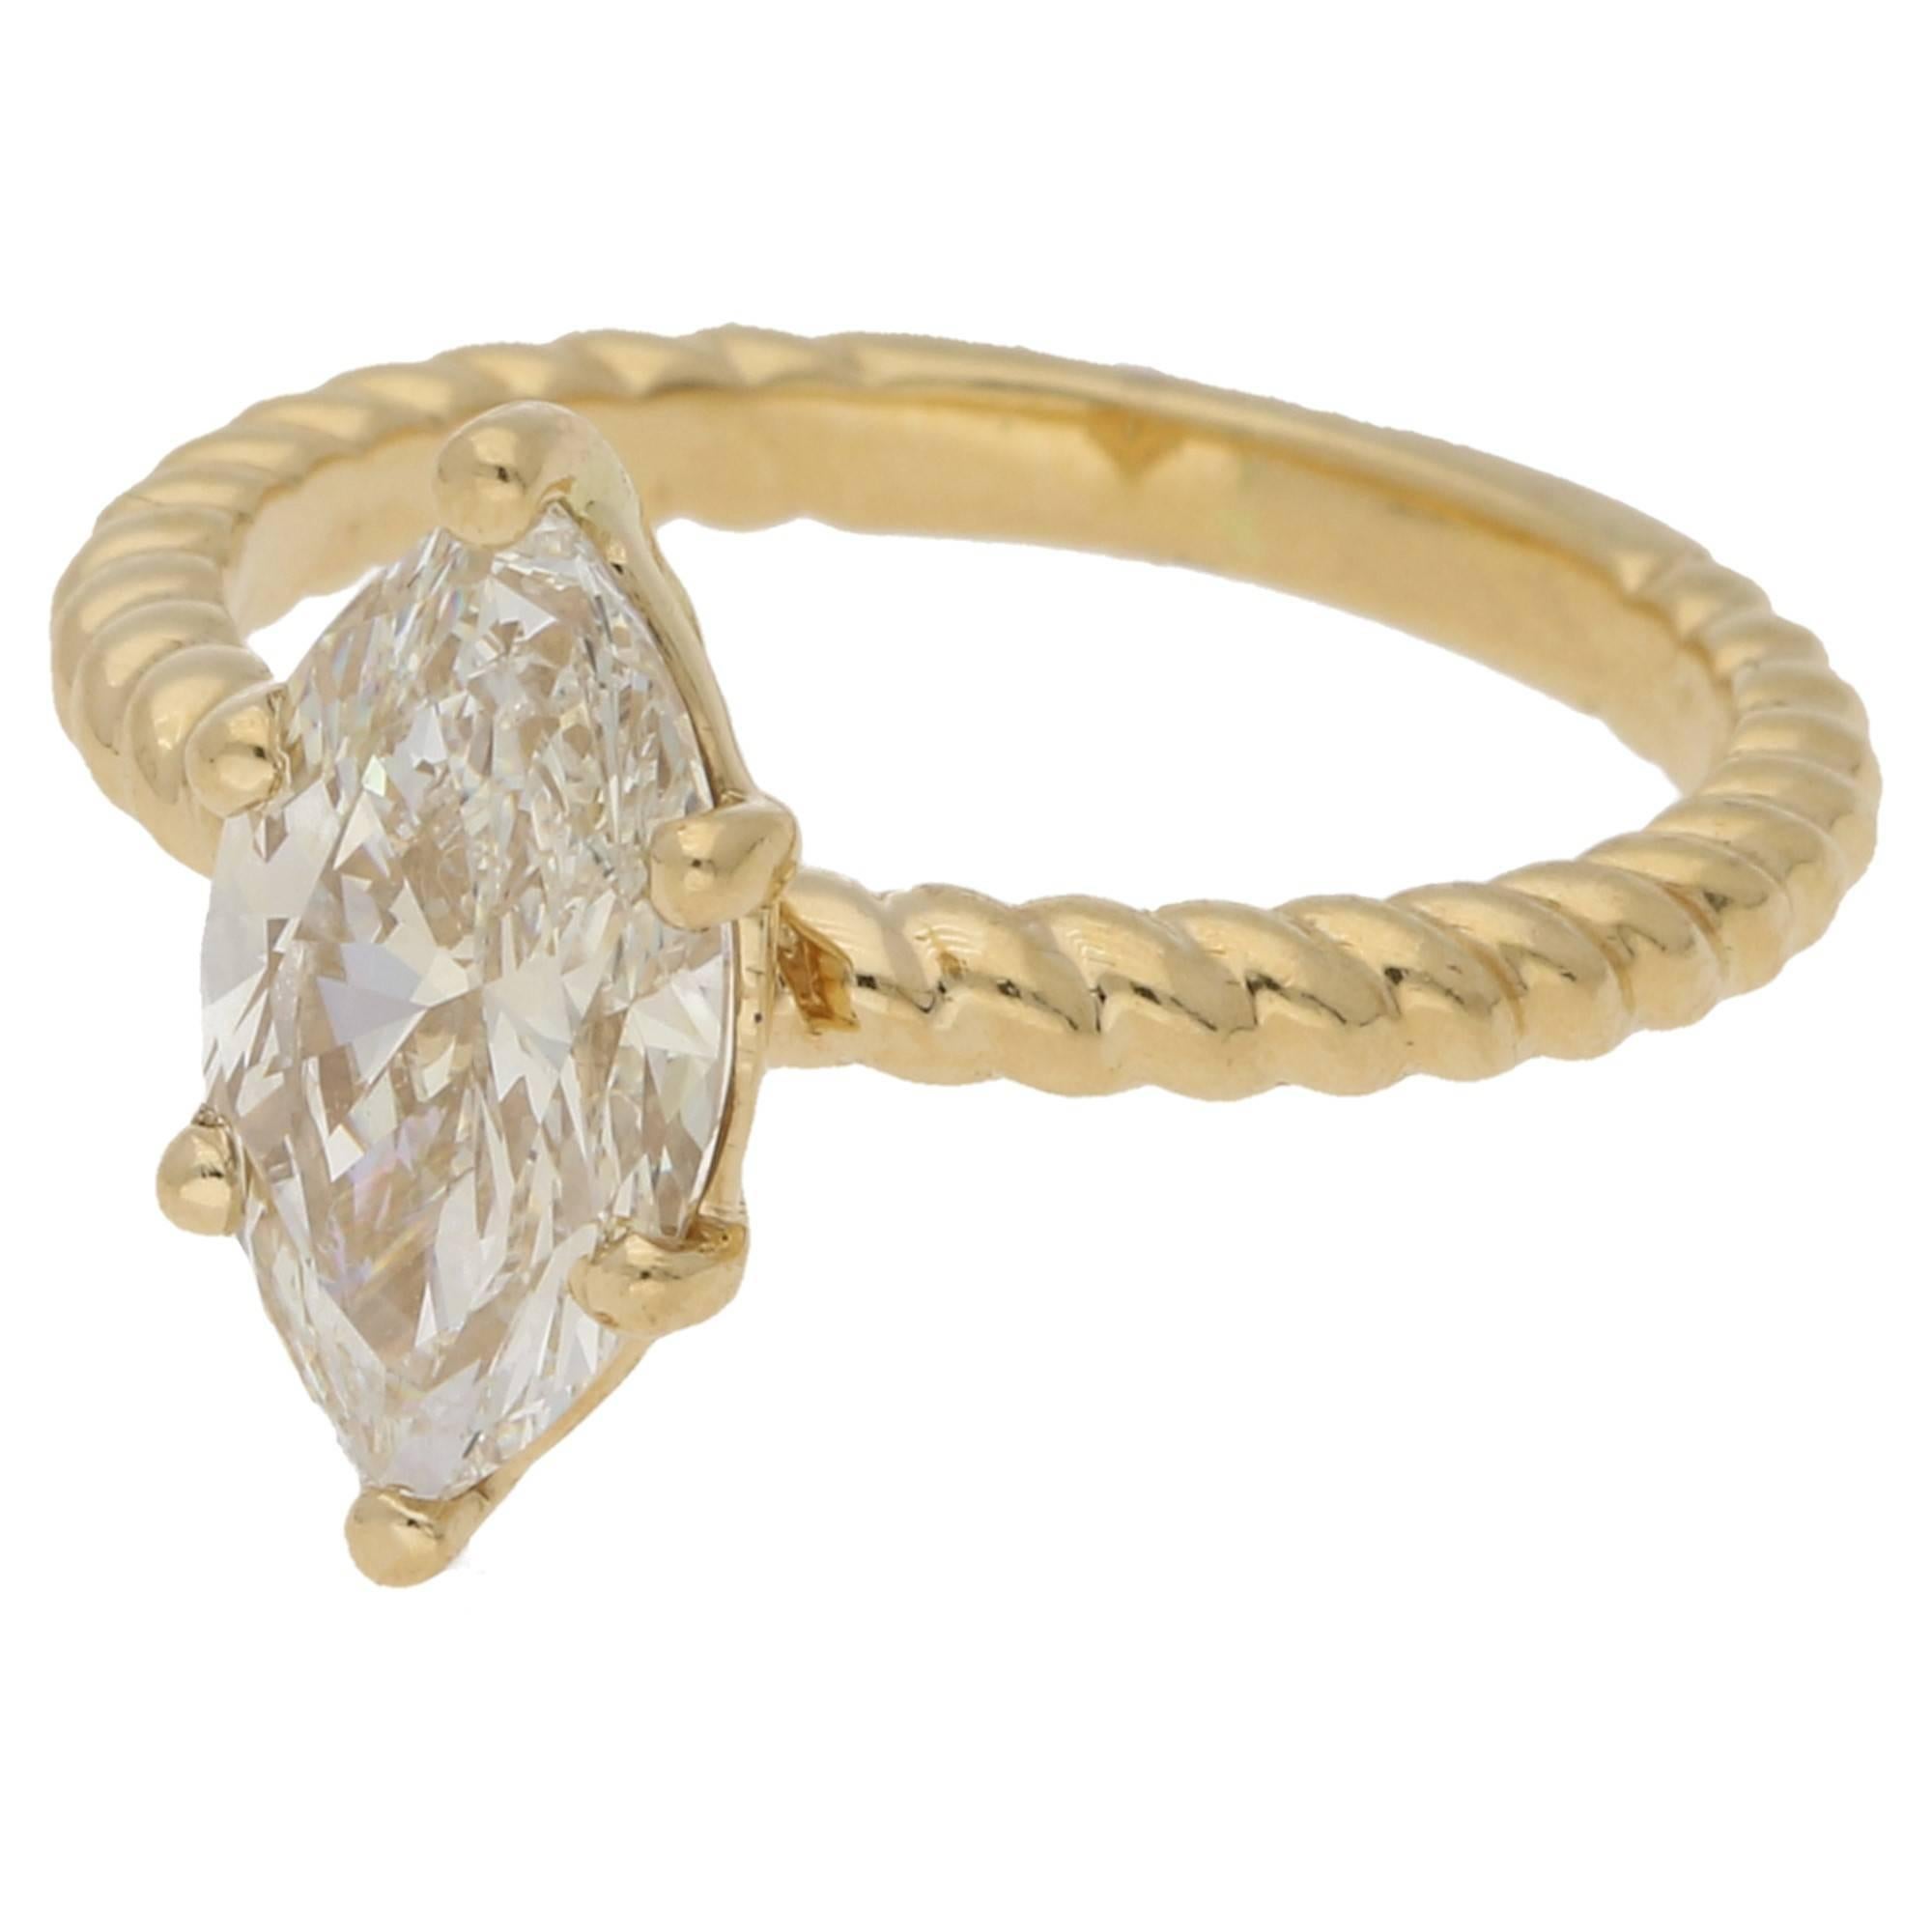 A beautiful, quirky and one-off ring featuring a marquise cut diamond, independently certified as 1.60ct JVVS2 set in a six claw double gallery setting to a rope twist shank in 18ct yellow gold. The ring is finger size J 1/2 but can be sized to